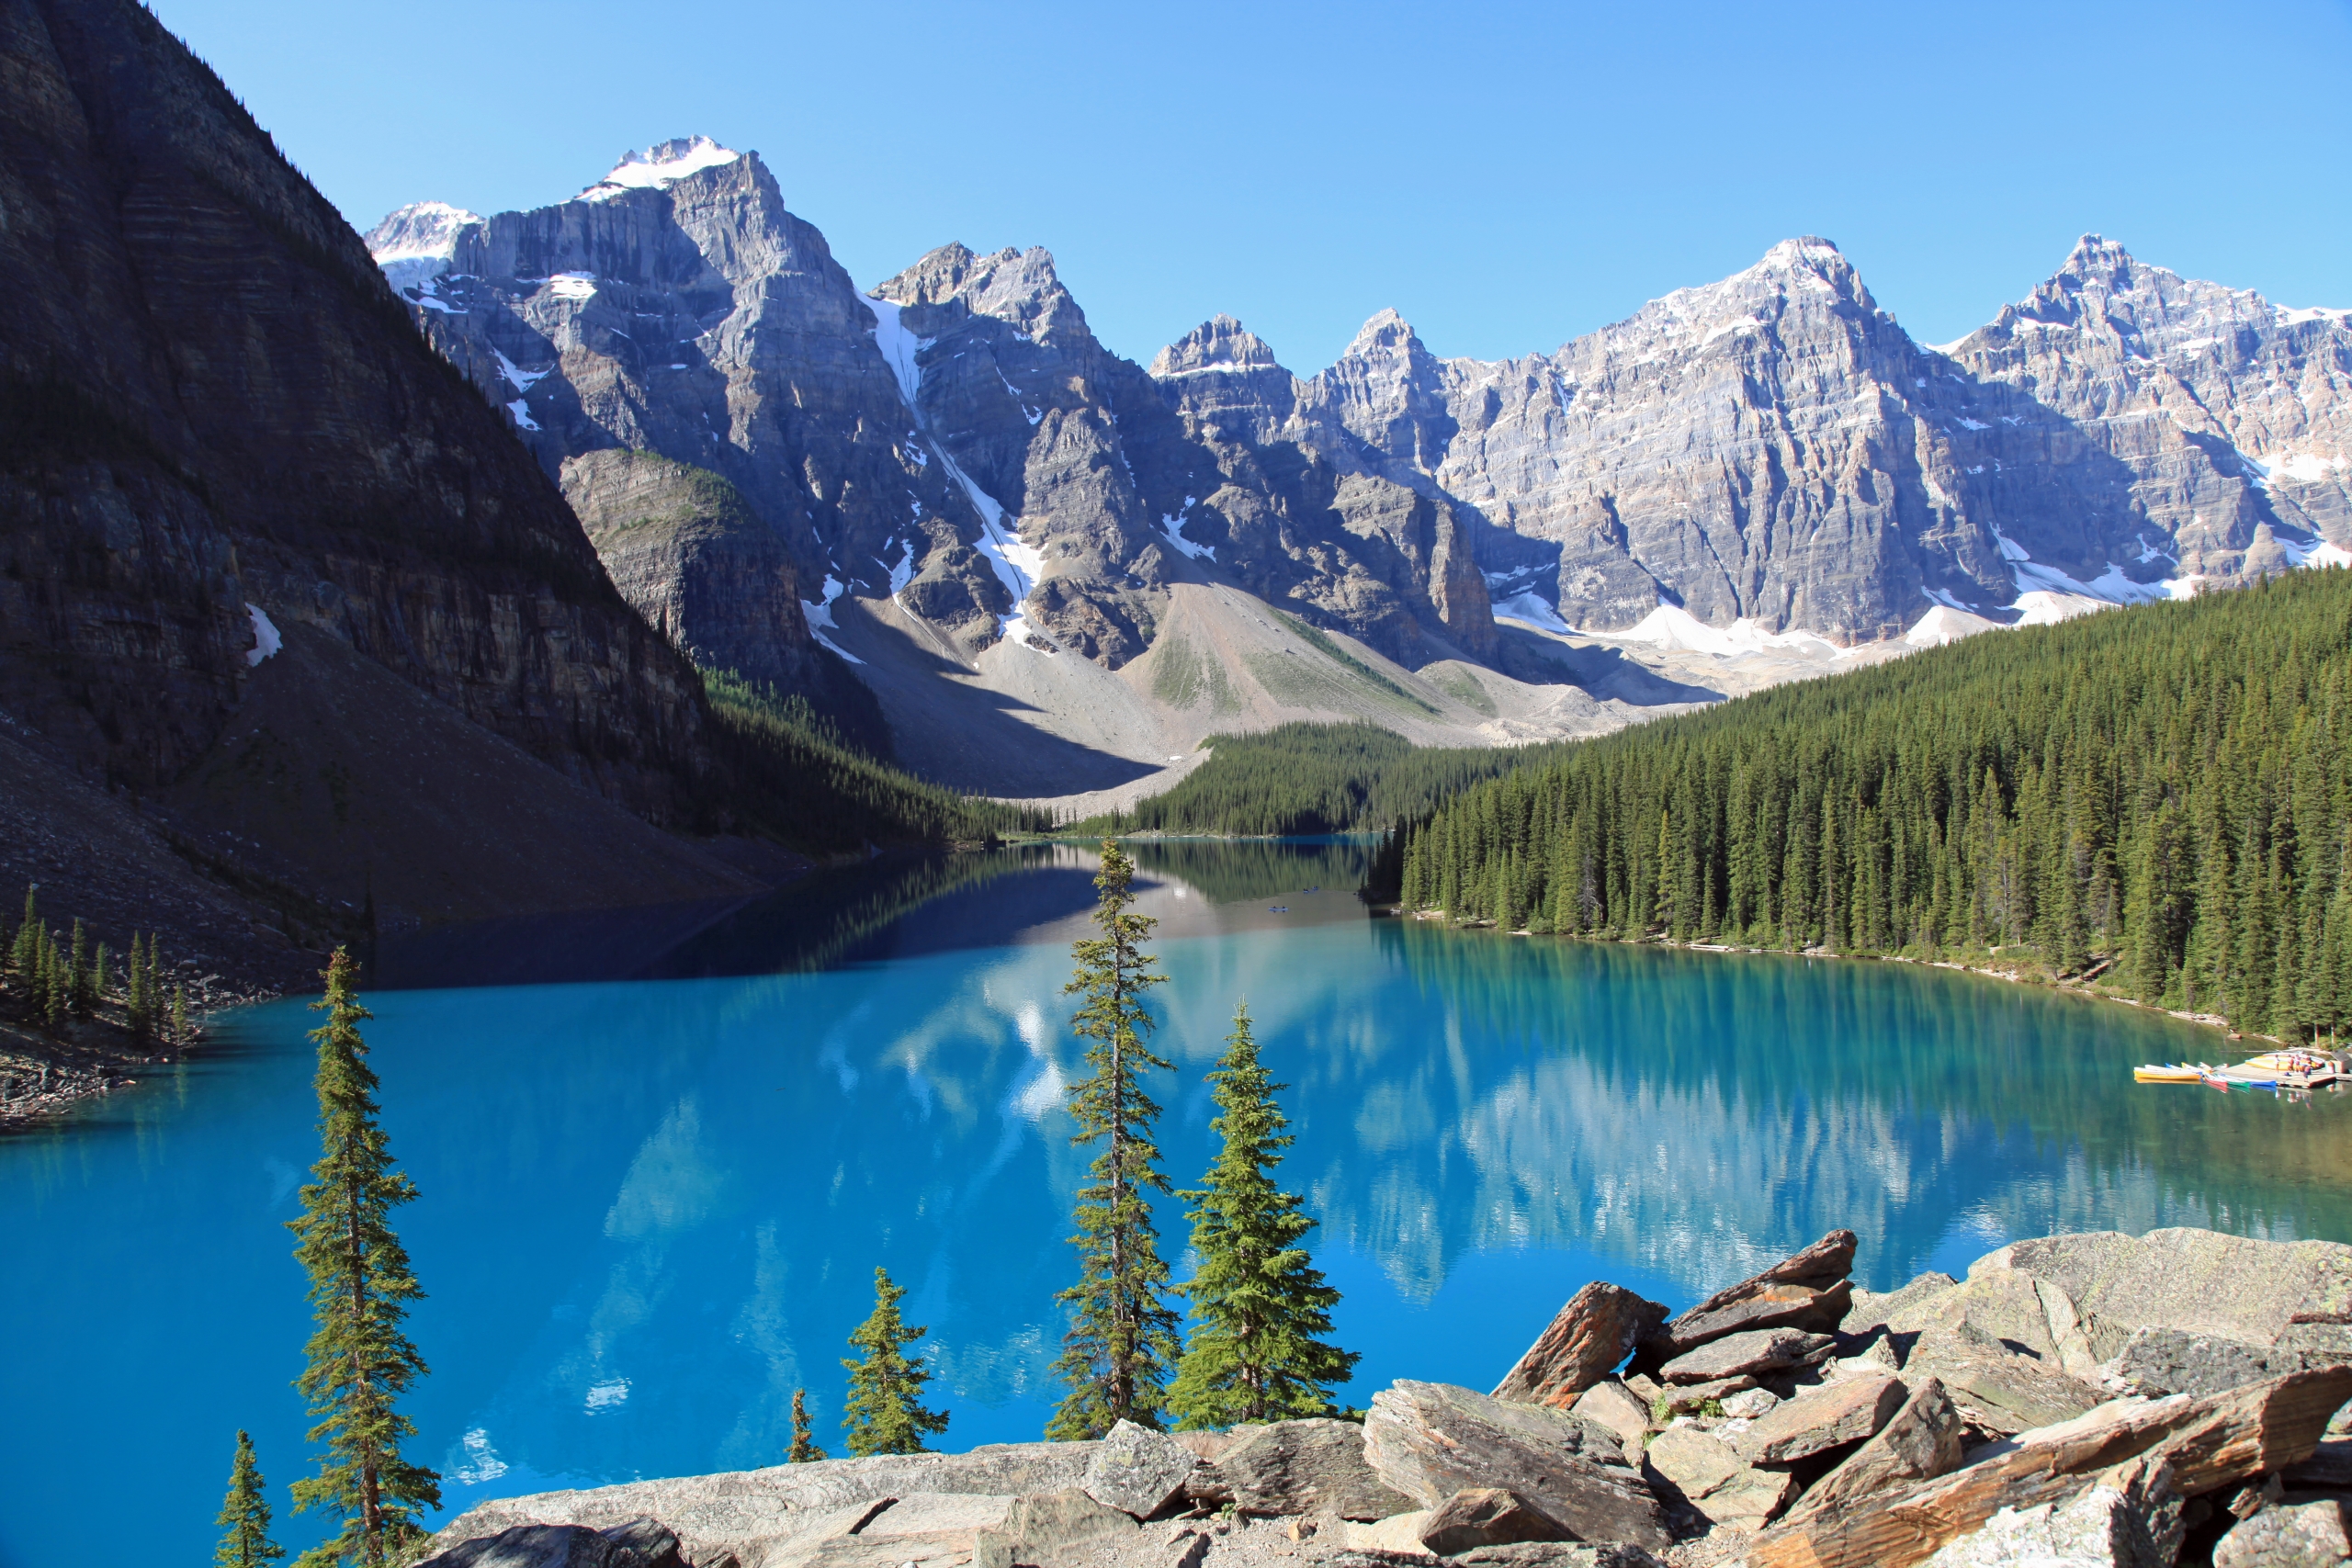 Moraine Lake in Banff National Park, Alberta, Canada as seen from a hiking trail